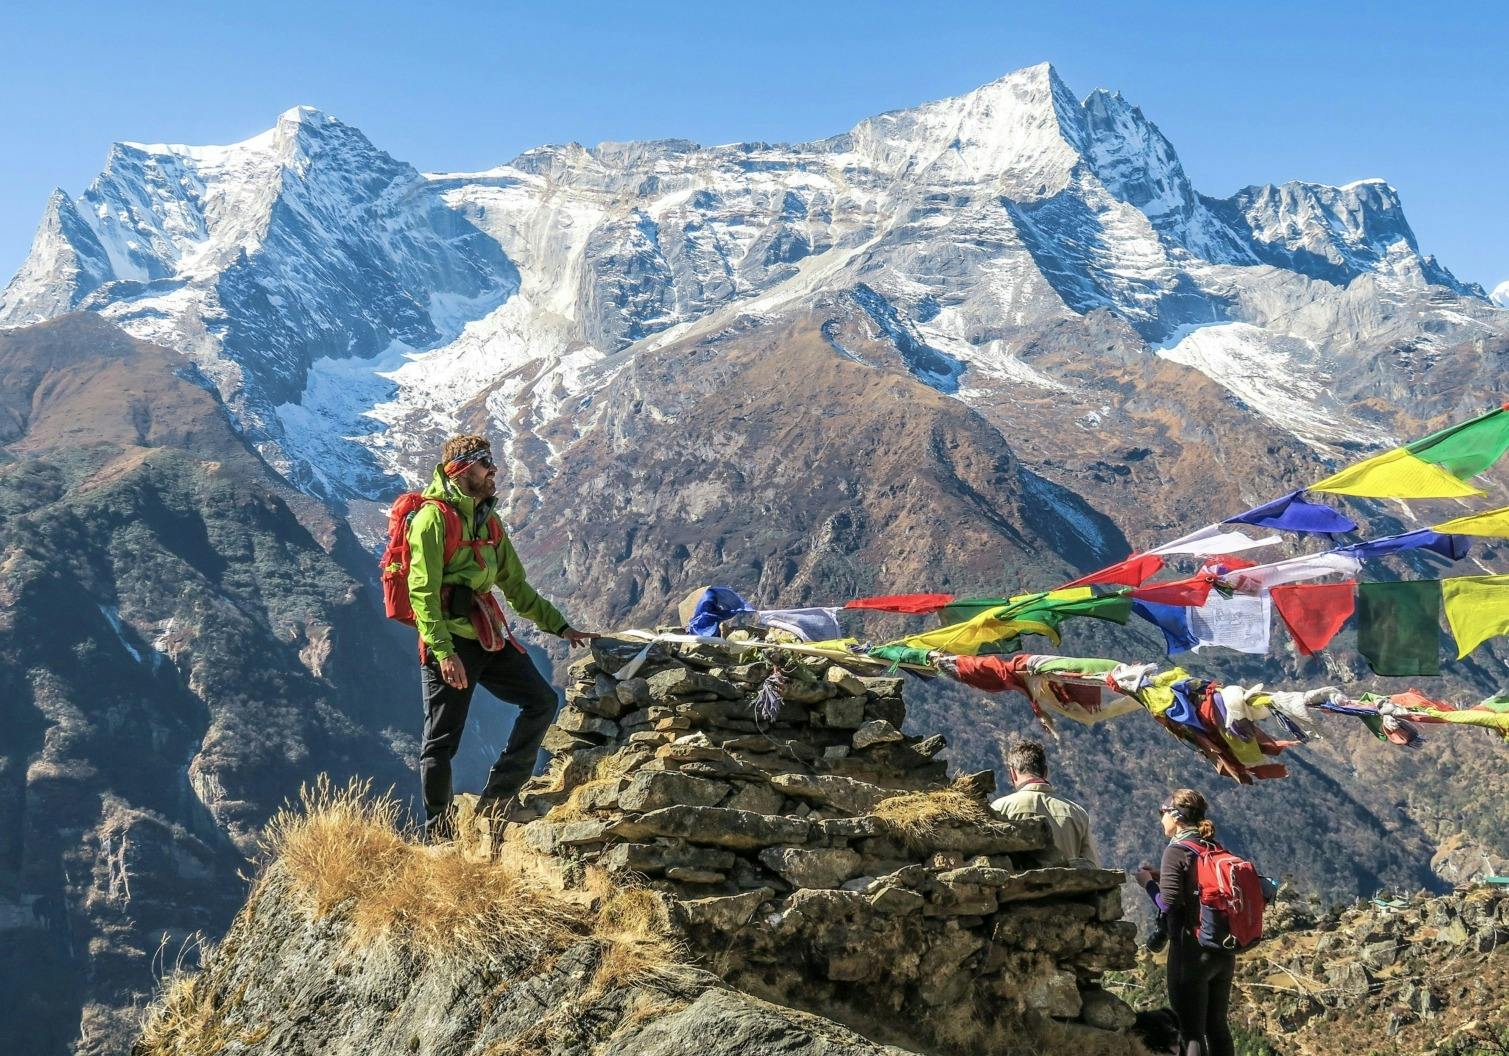 Things You Should Know Before You Arrive in Nepal